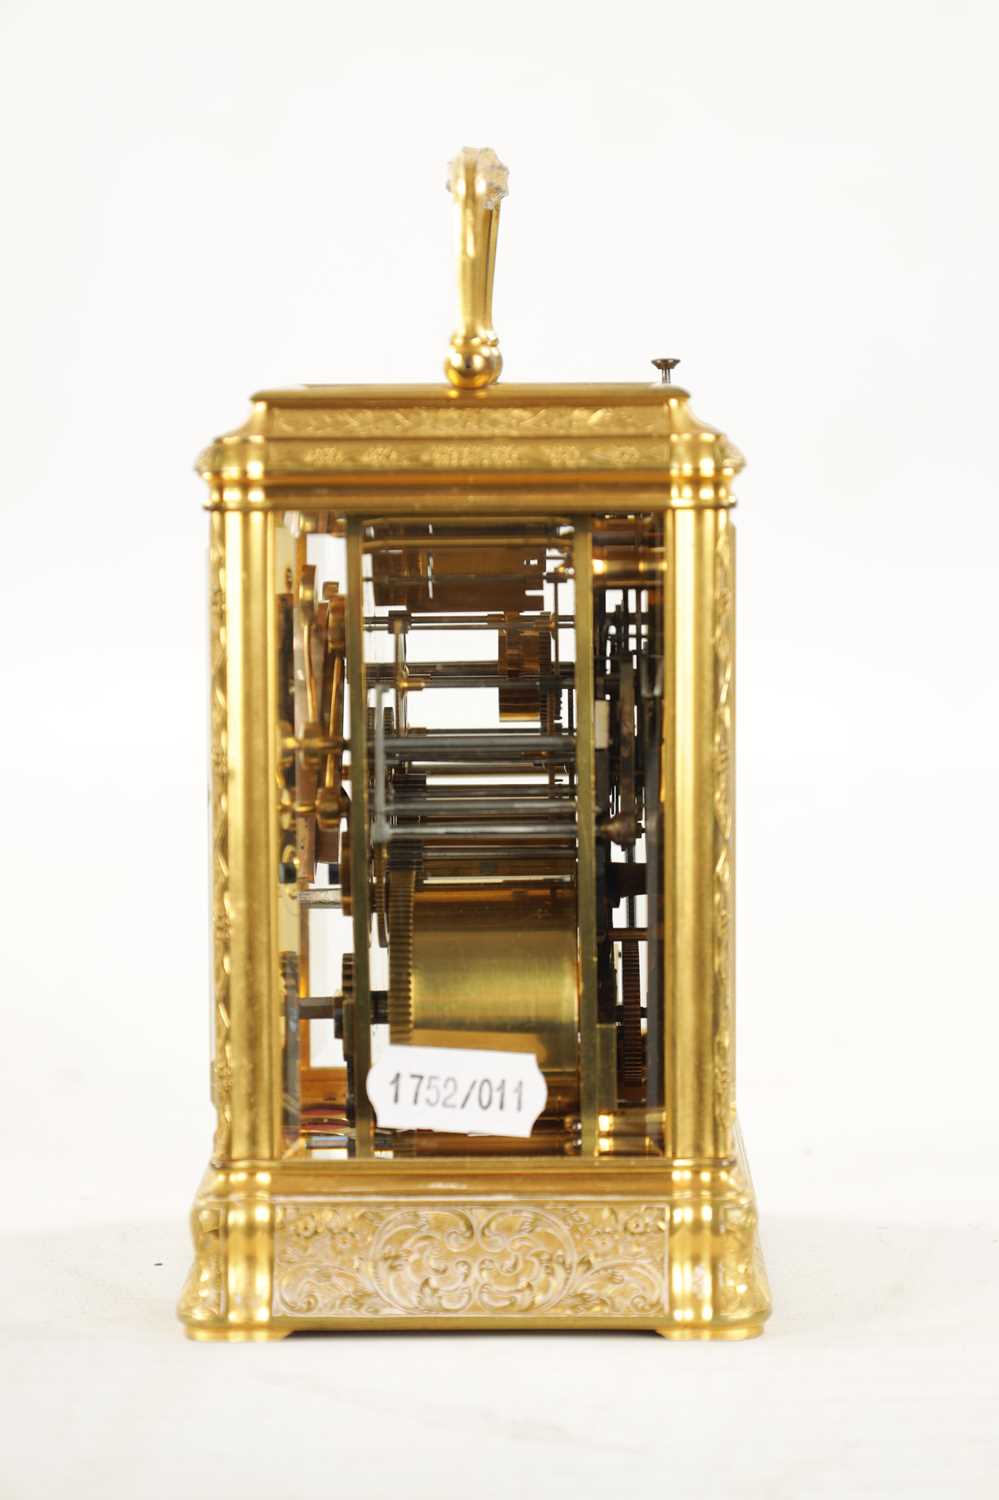 HENRI JACOT, PARIS. A LATE 19TH CENTURY FRENCH GRAND SONNERIE CARRIAGE CLOCK - Image 9 of 20